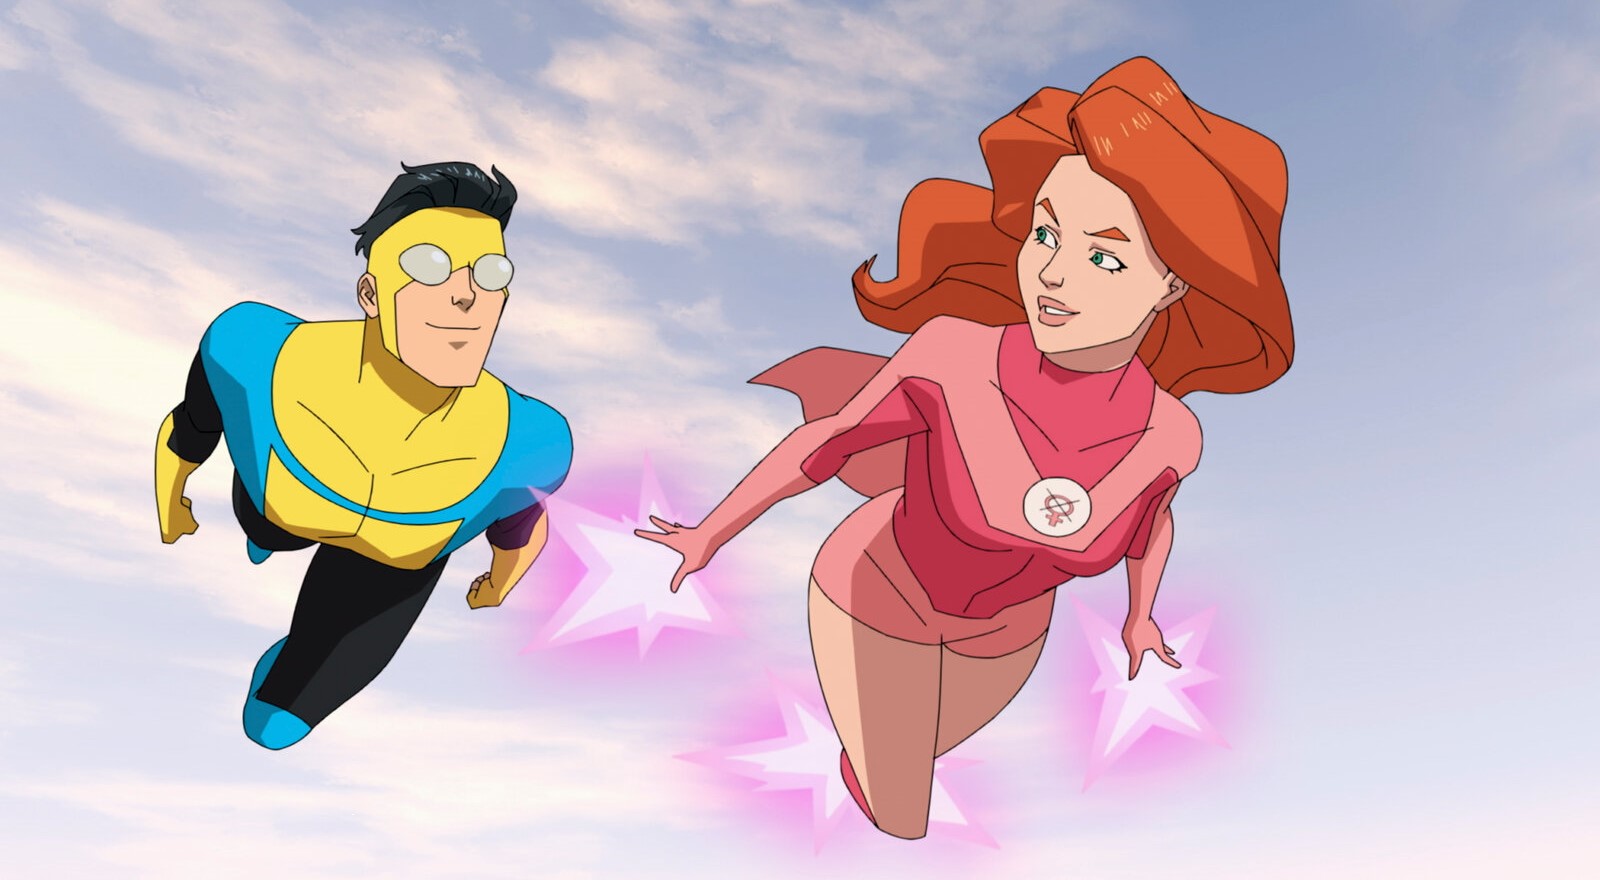 #Invincible-Realfilm ist weiterhin in Planung